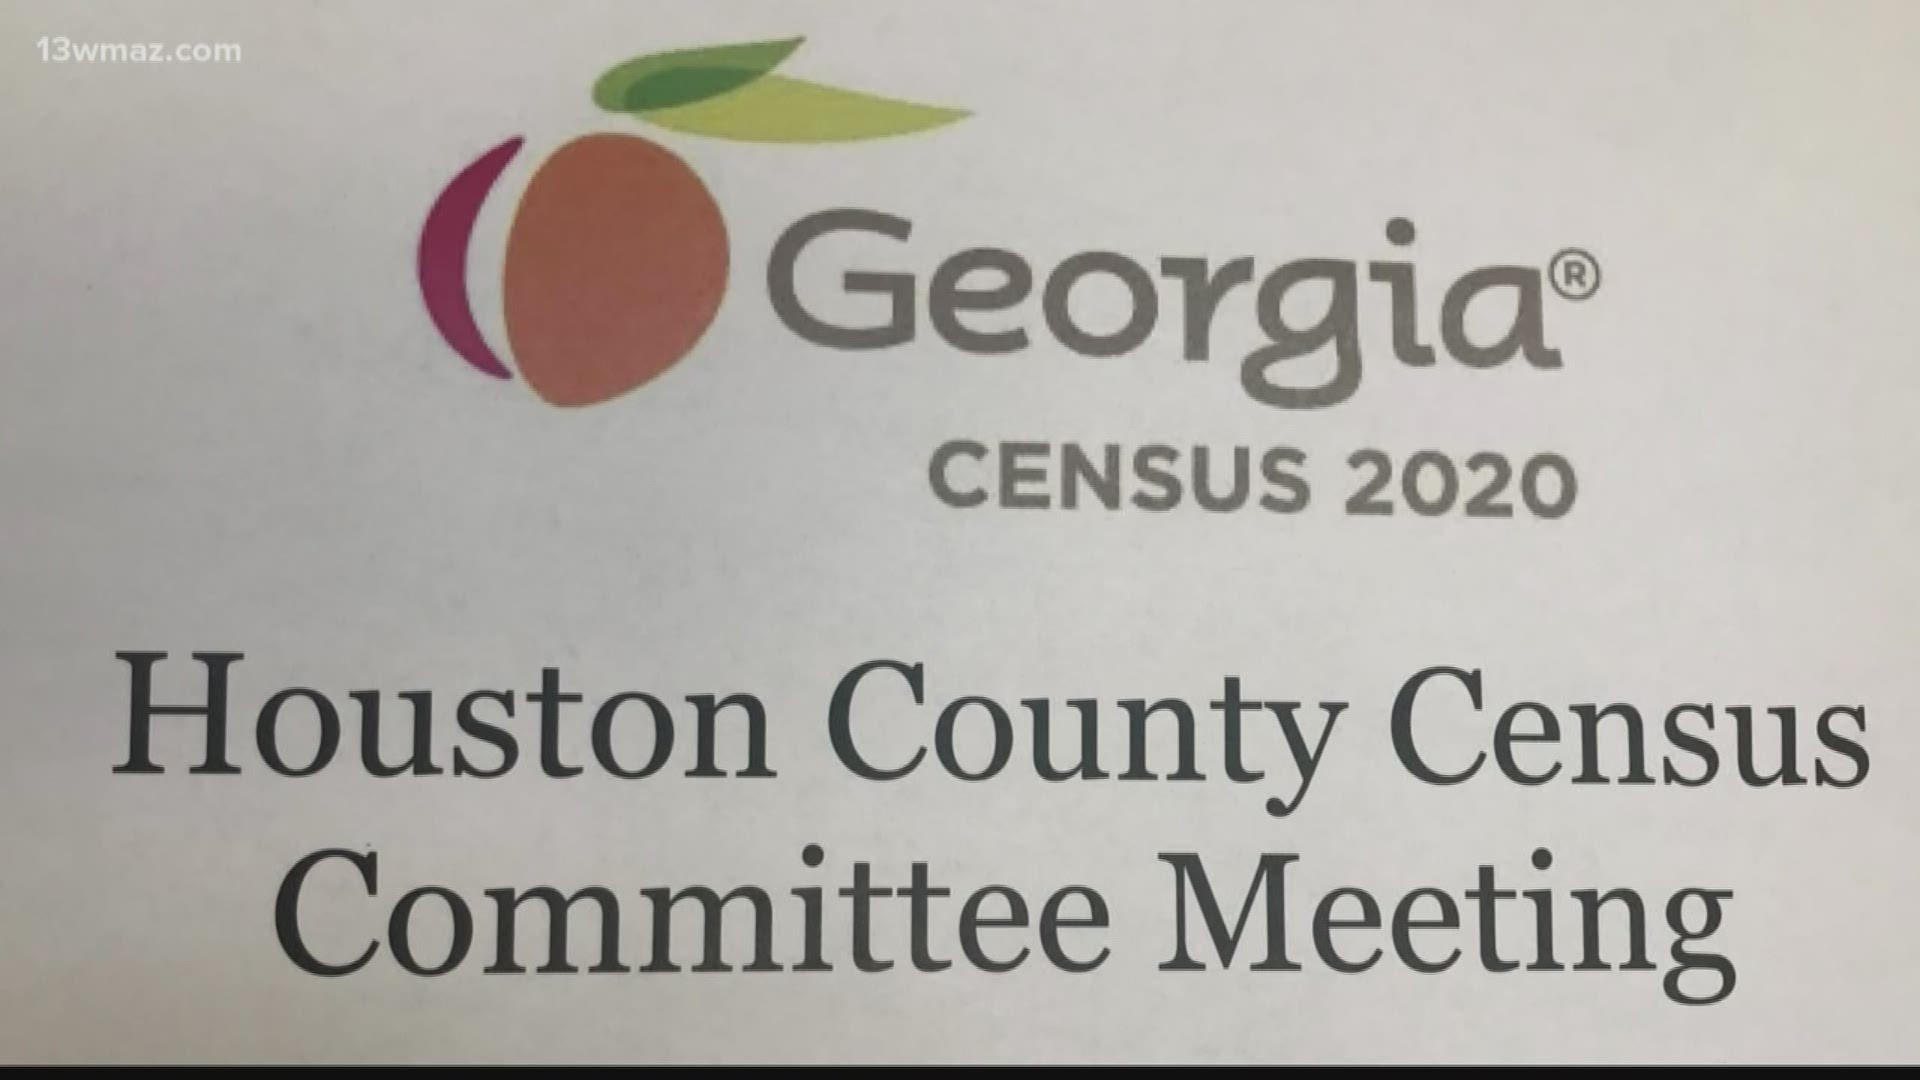 The 2020 Census is still many months away, and Houston County is expecting to see its population climb once again. Sarah Hammond tells us how to make sure you're counted and why it matters.